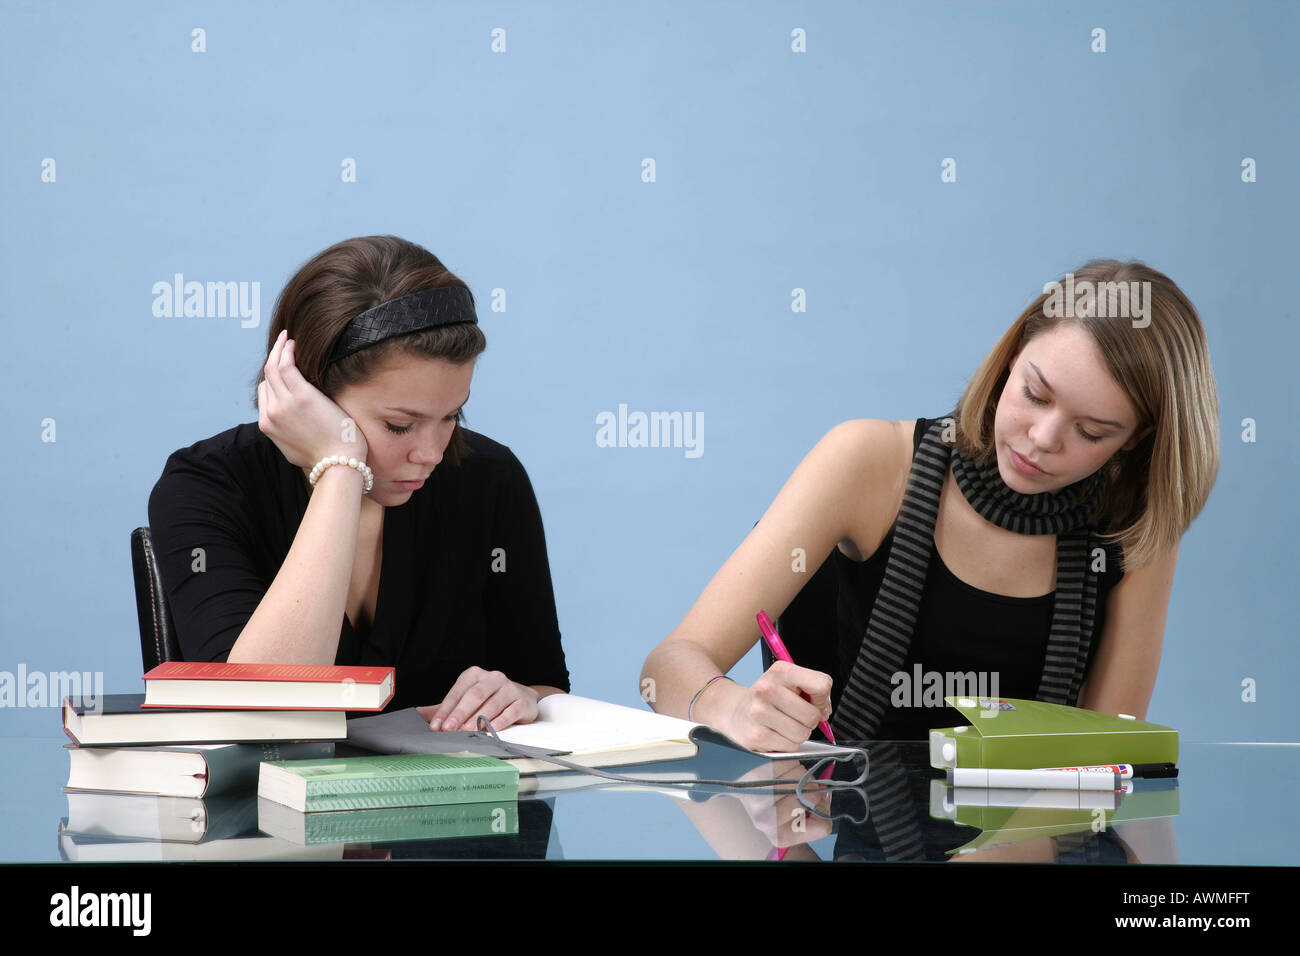 Two young girls doing homework together Stock Photo